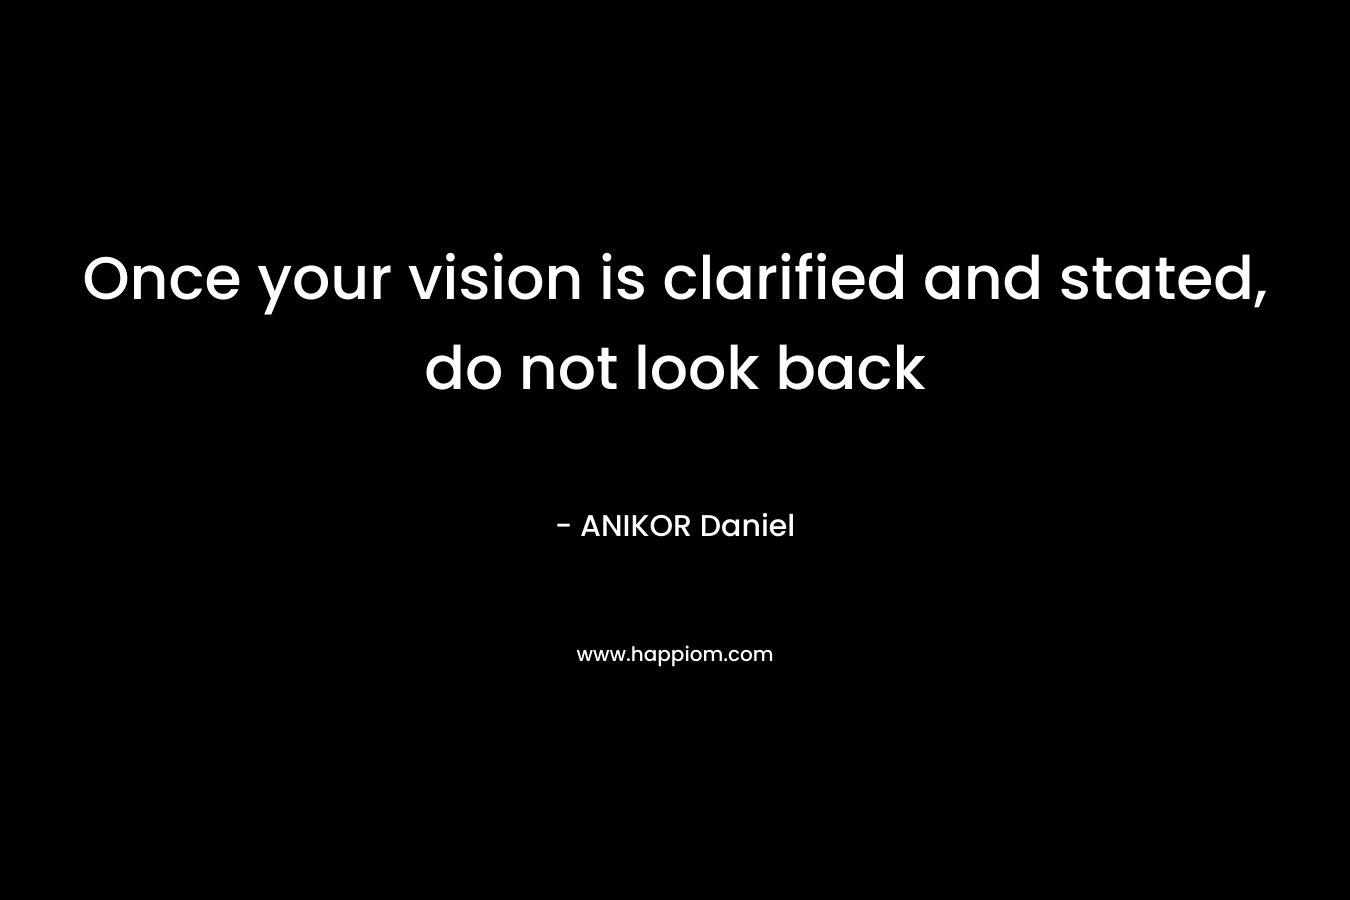 Once your vision is clarified and stated, do not look back